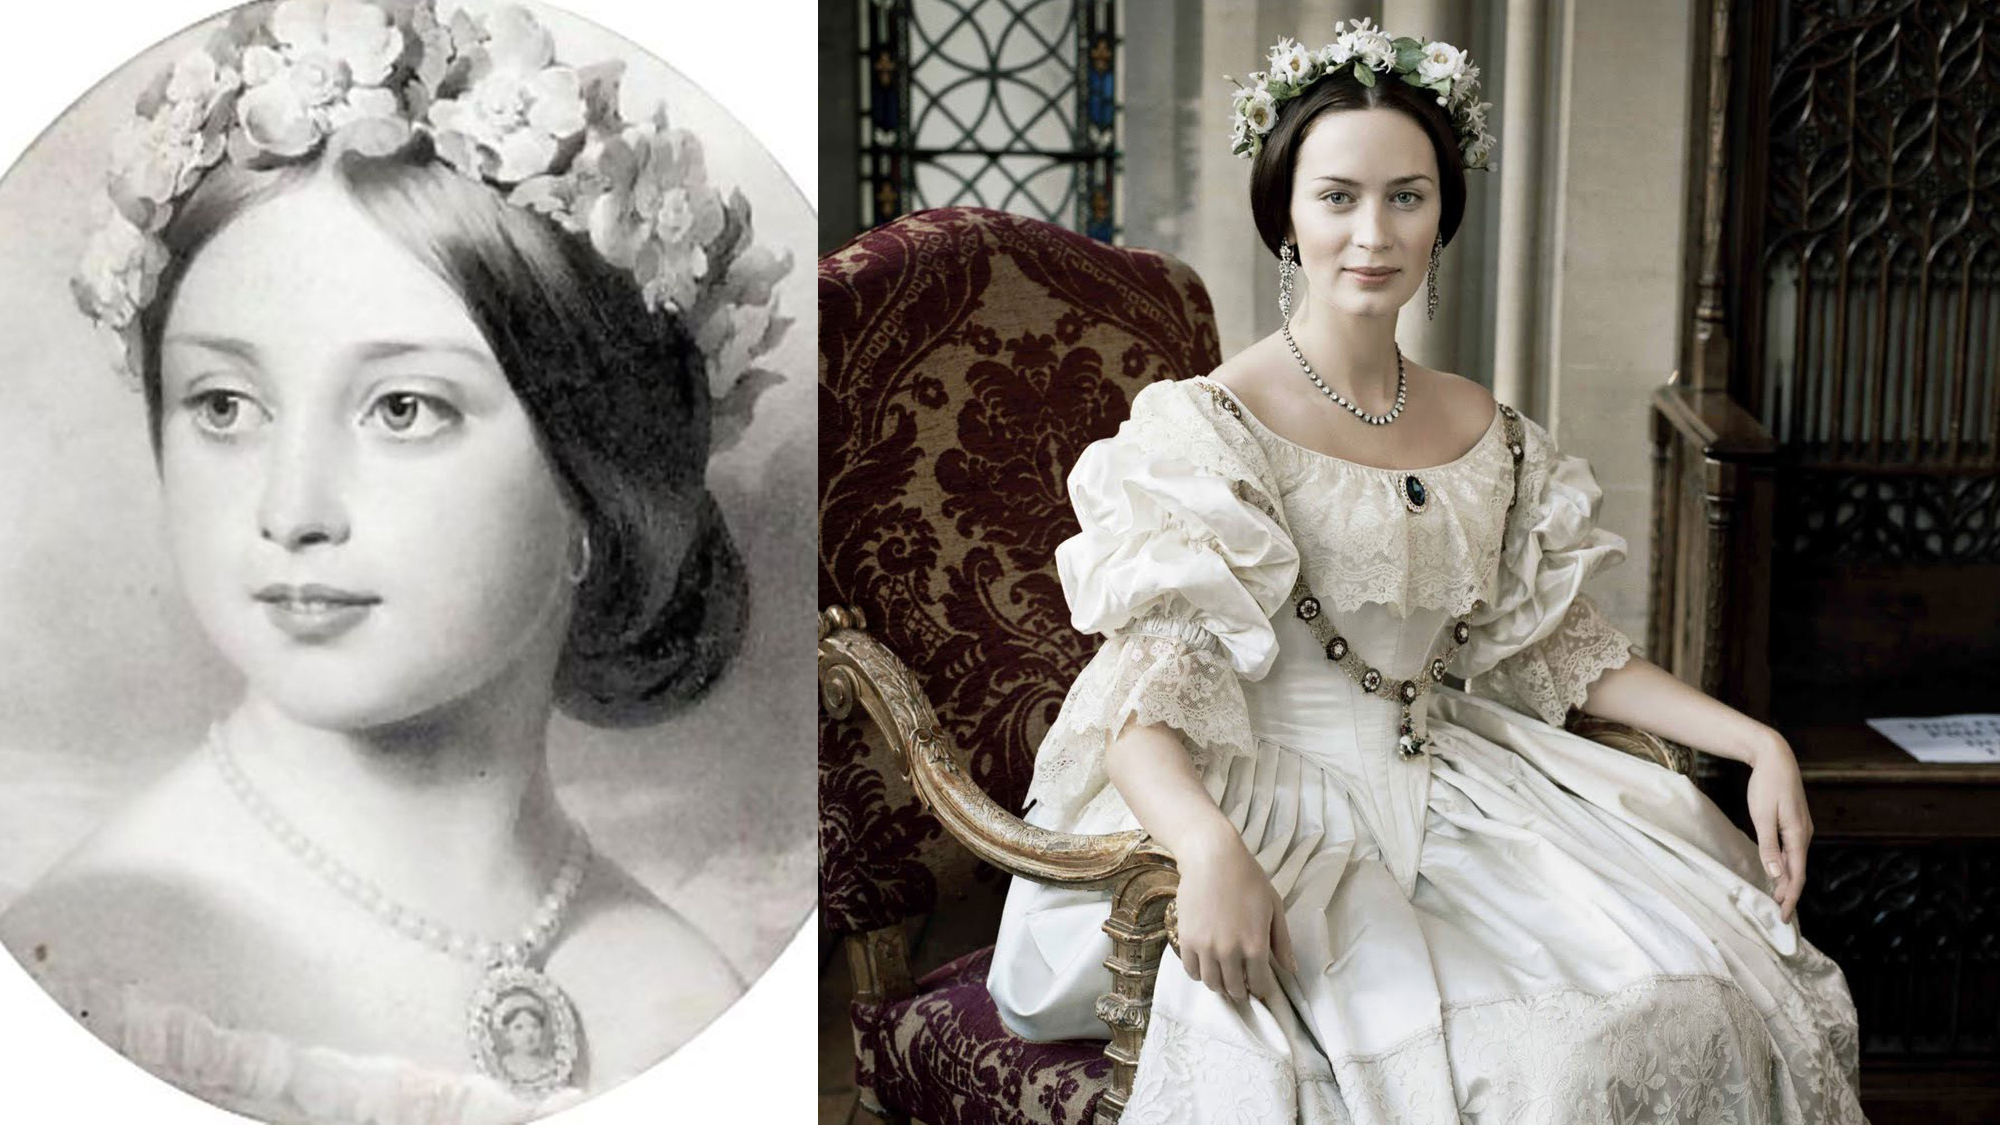 During her 67-year reign, Queen Victoria survived at least 7 assassination attempts. One attempt was by an 18-year-old hunchbacked dwarf, who was later caught when police rounded up every hunchback and dwarf in London.